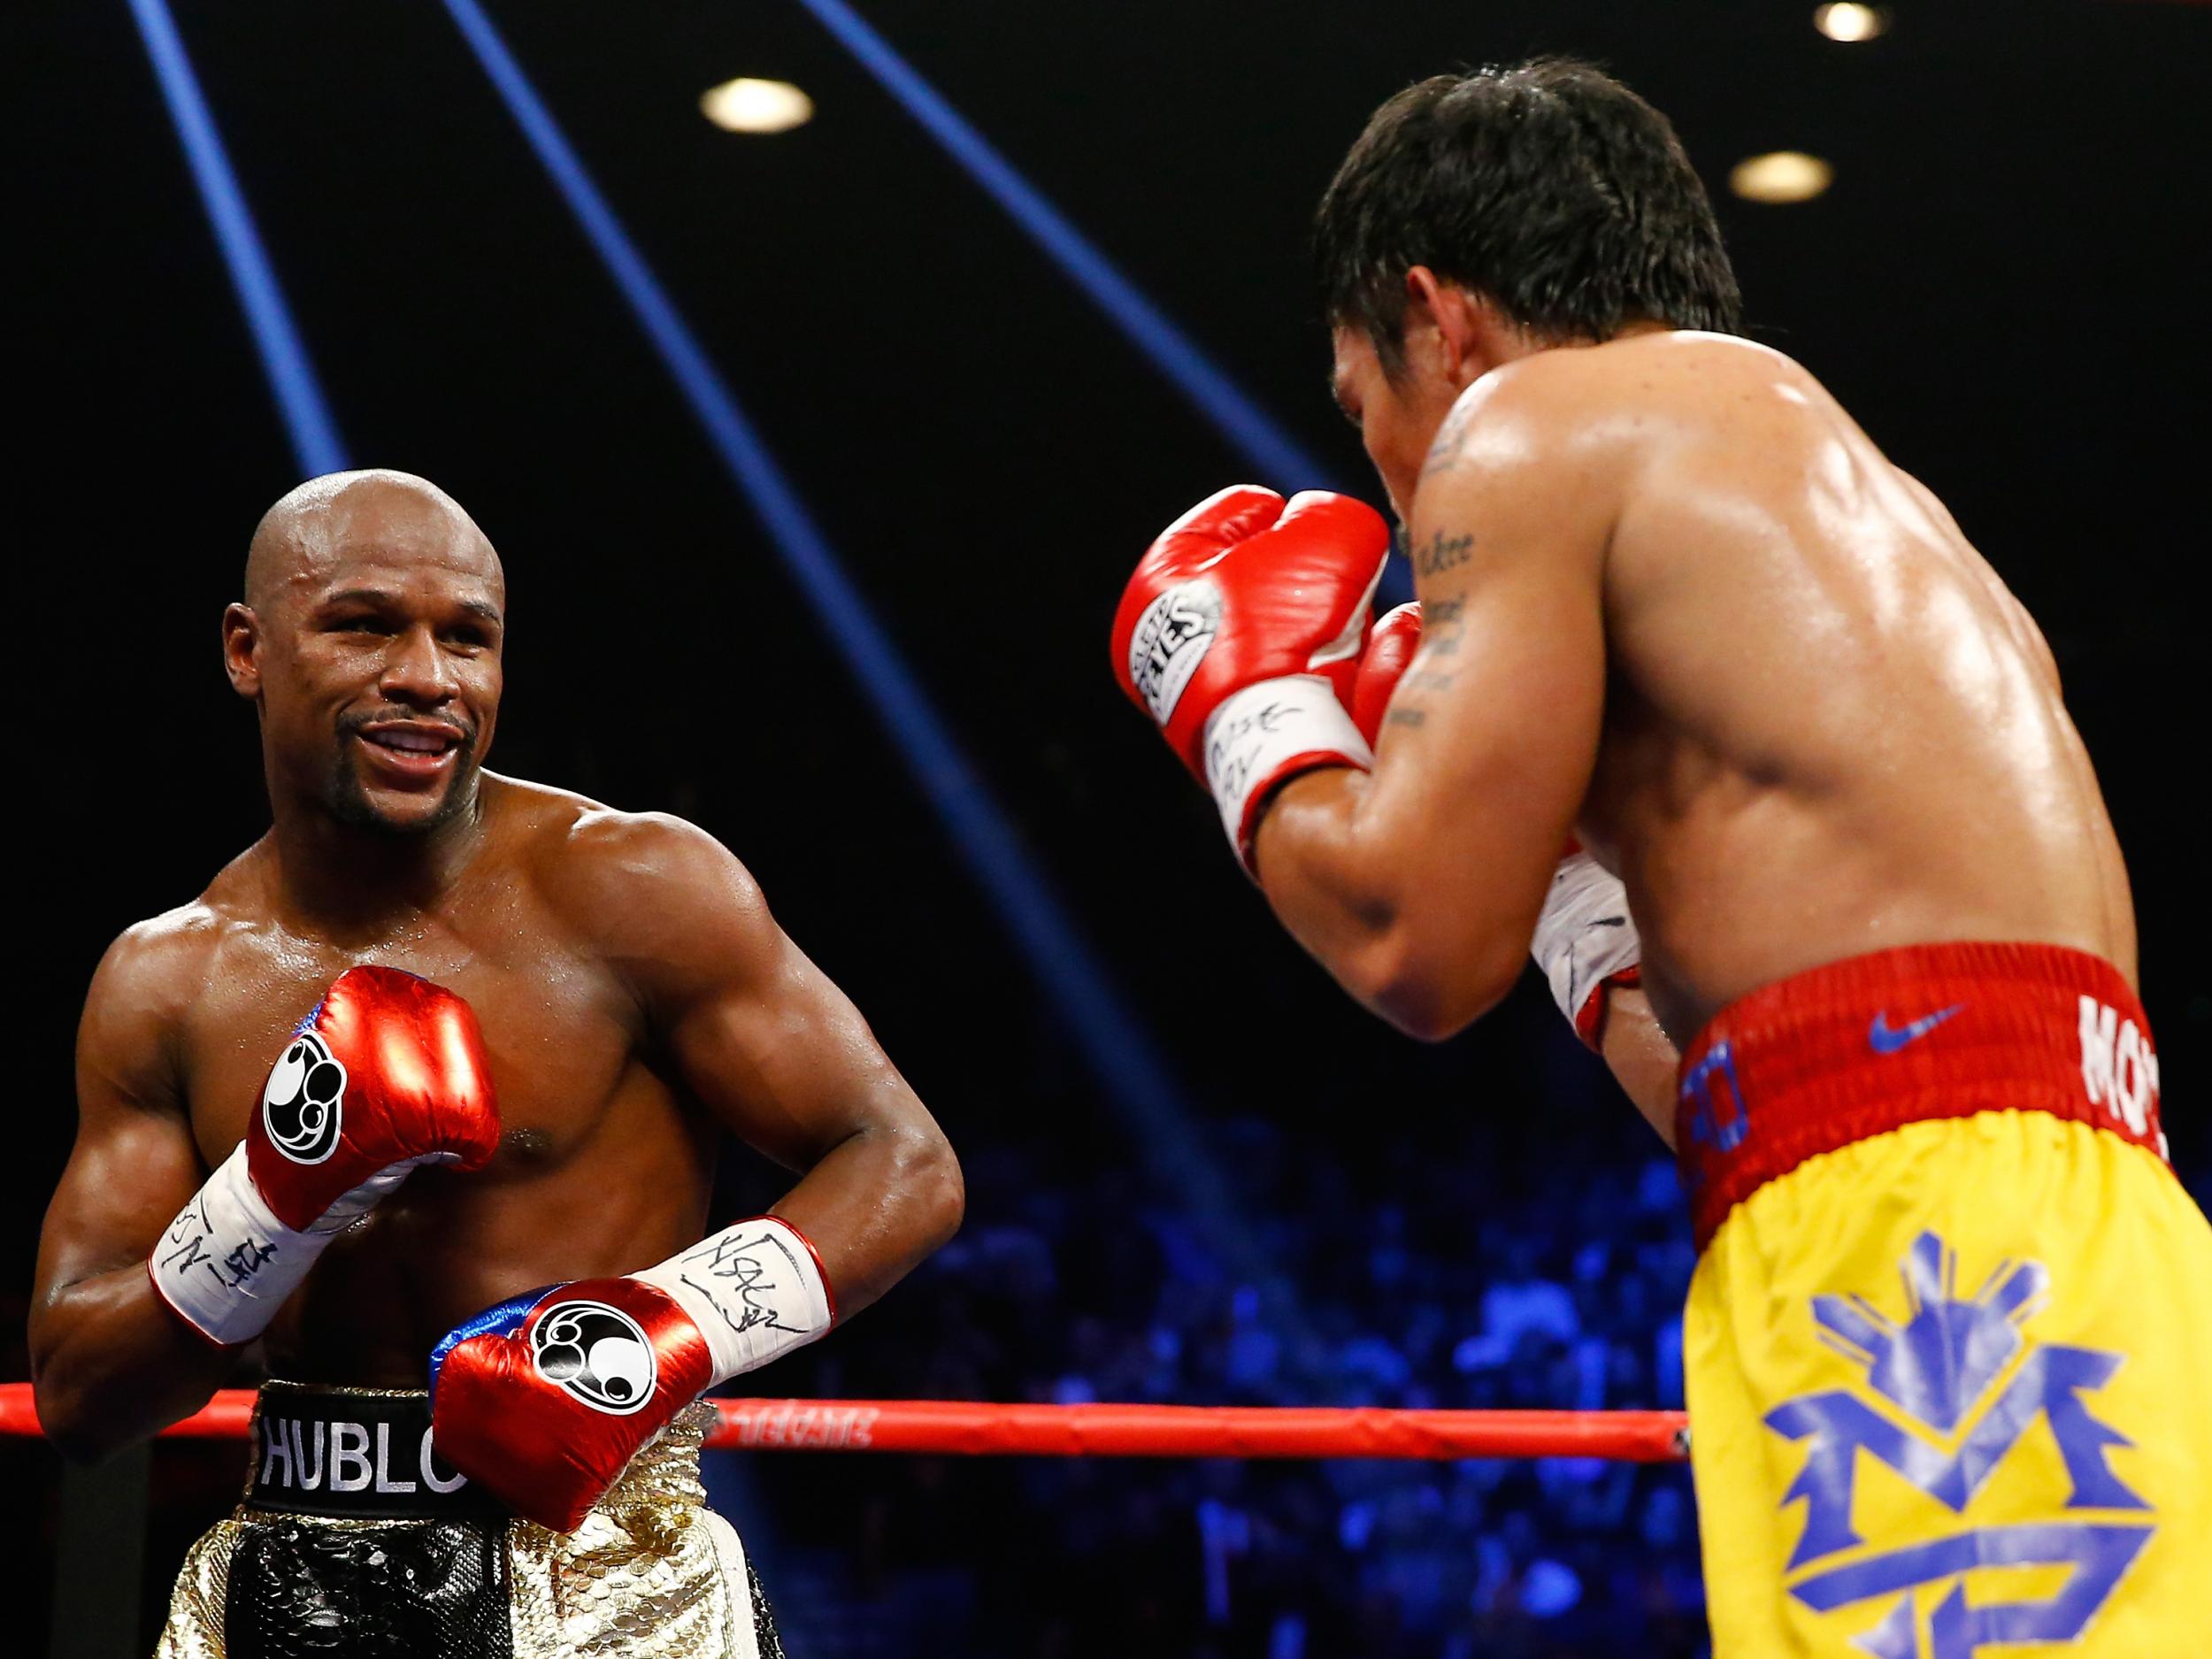 Mayweather is regarded as one of the greatest boxers of all-time